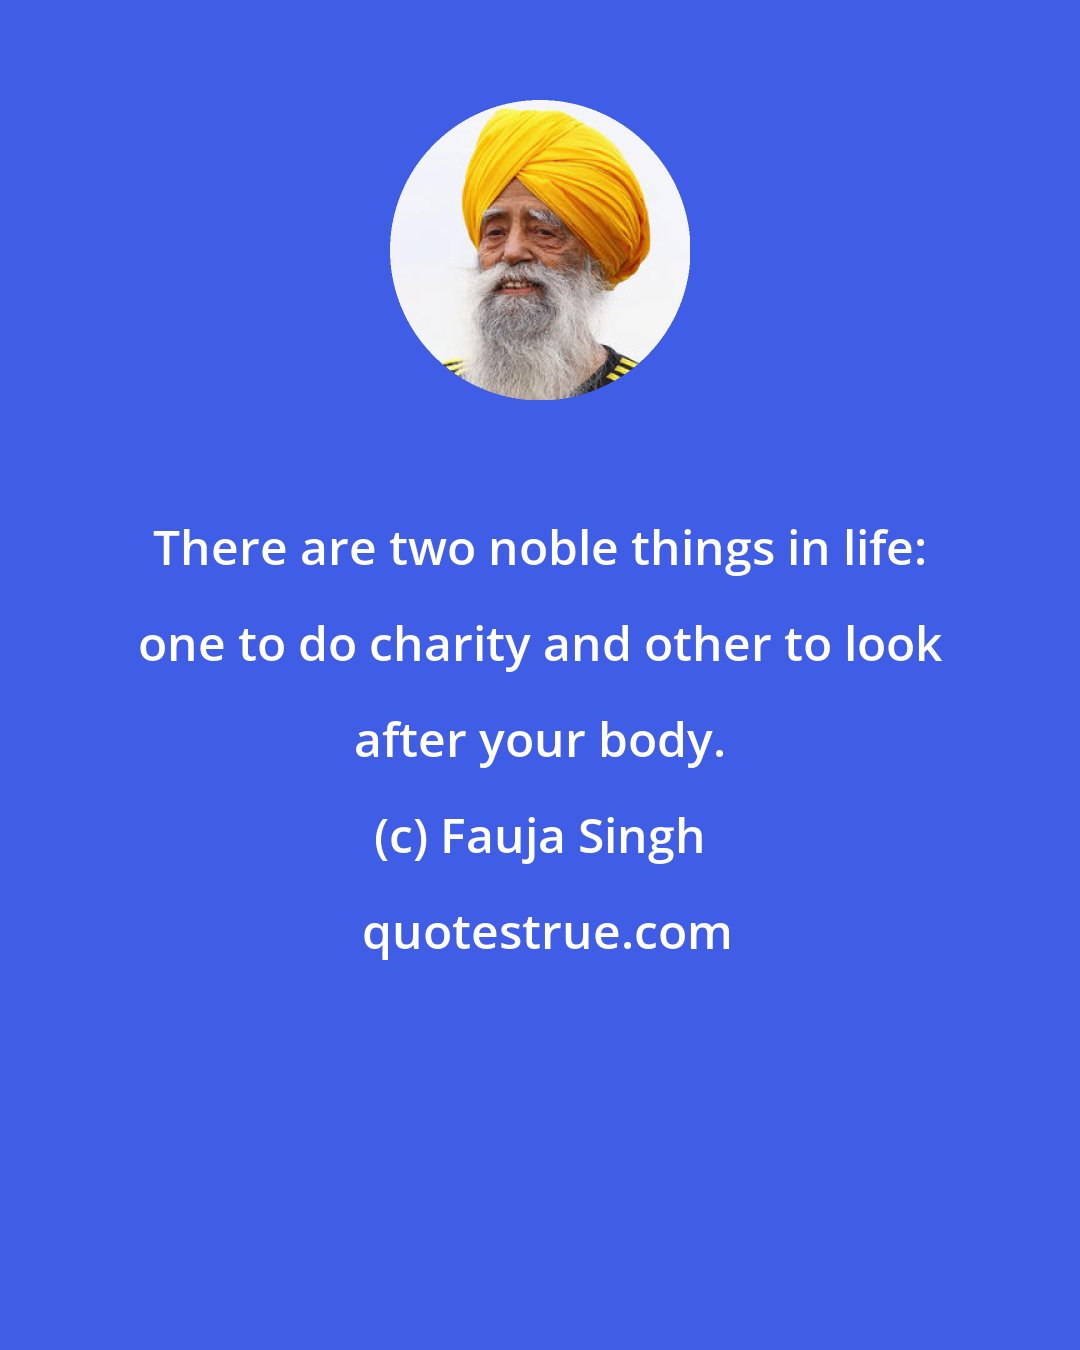 Fauja Singh: There are two noble things in life: one to do charity and other to look after your body.